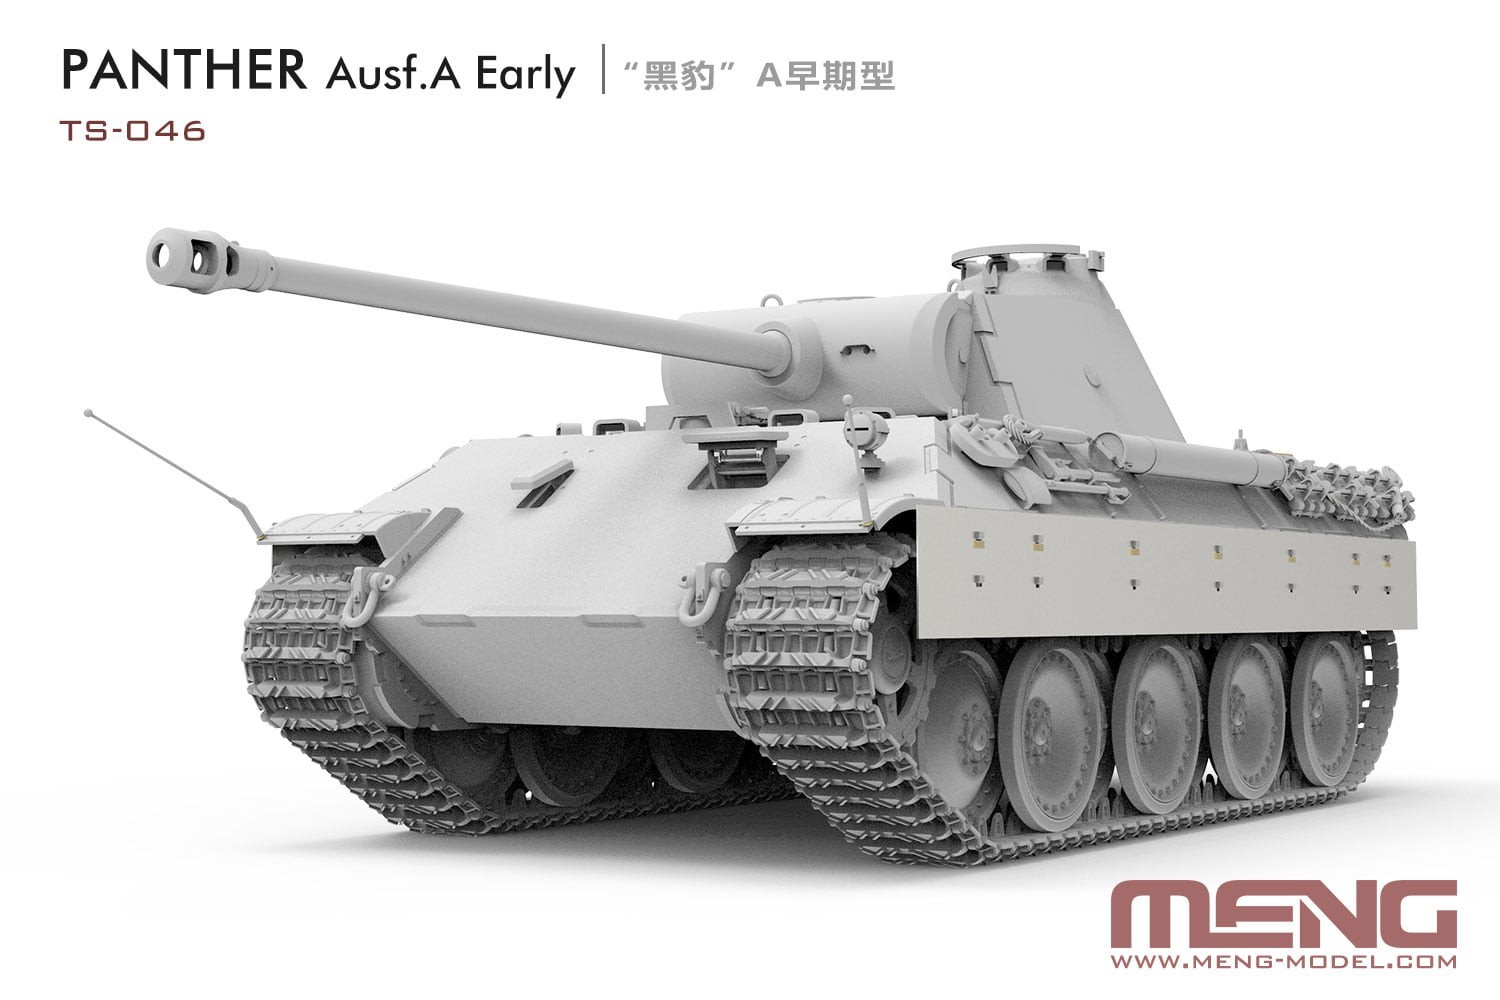 TS-046 Panther Ausf.A Early